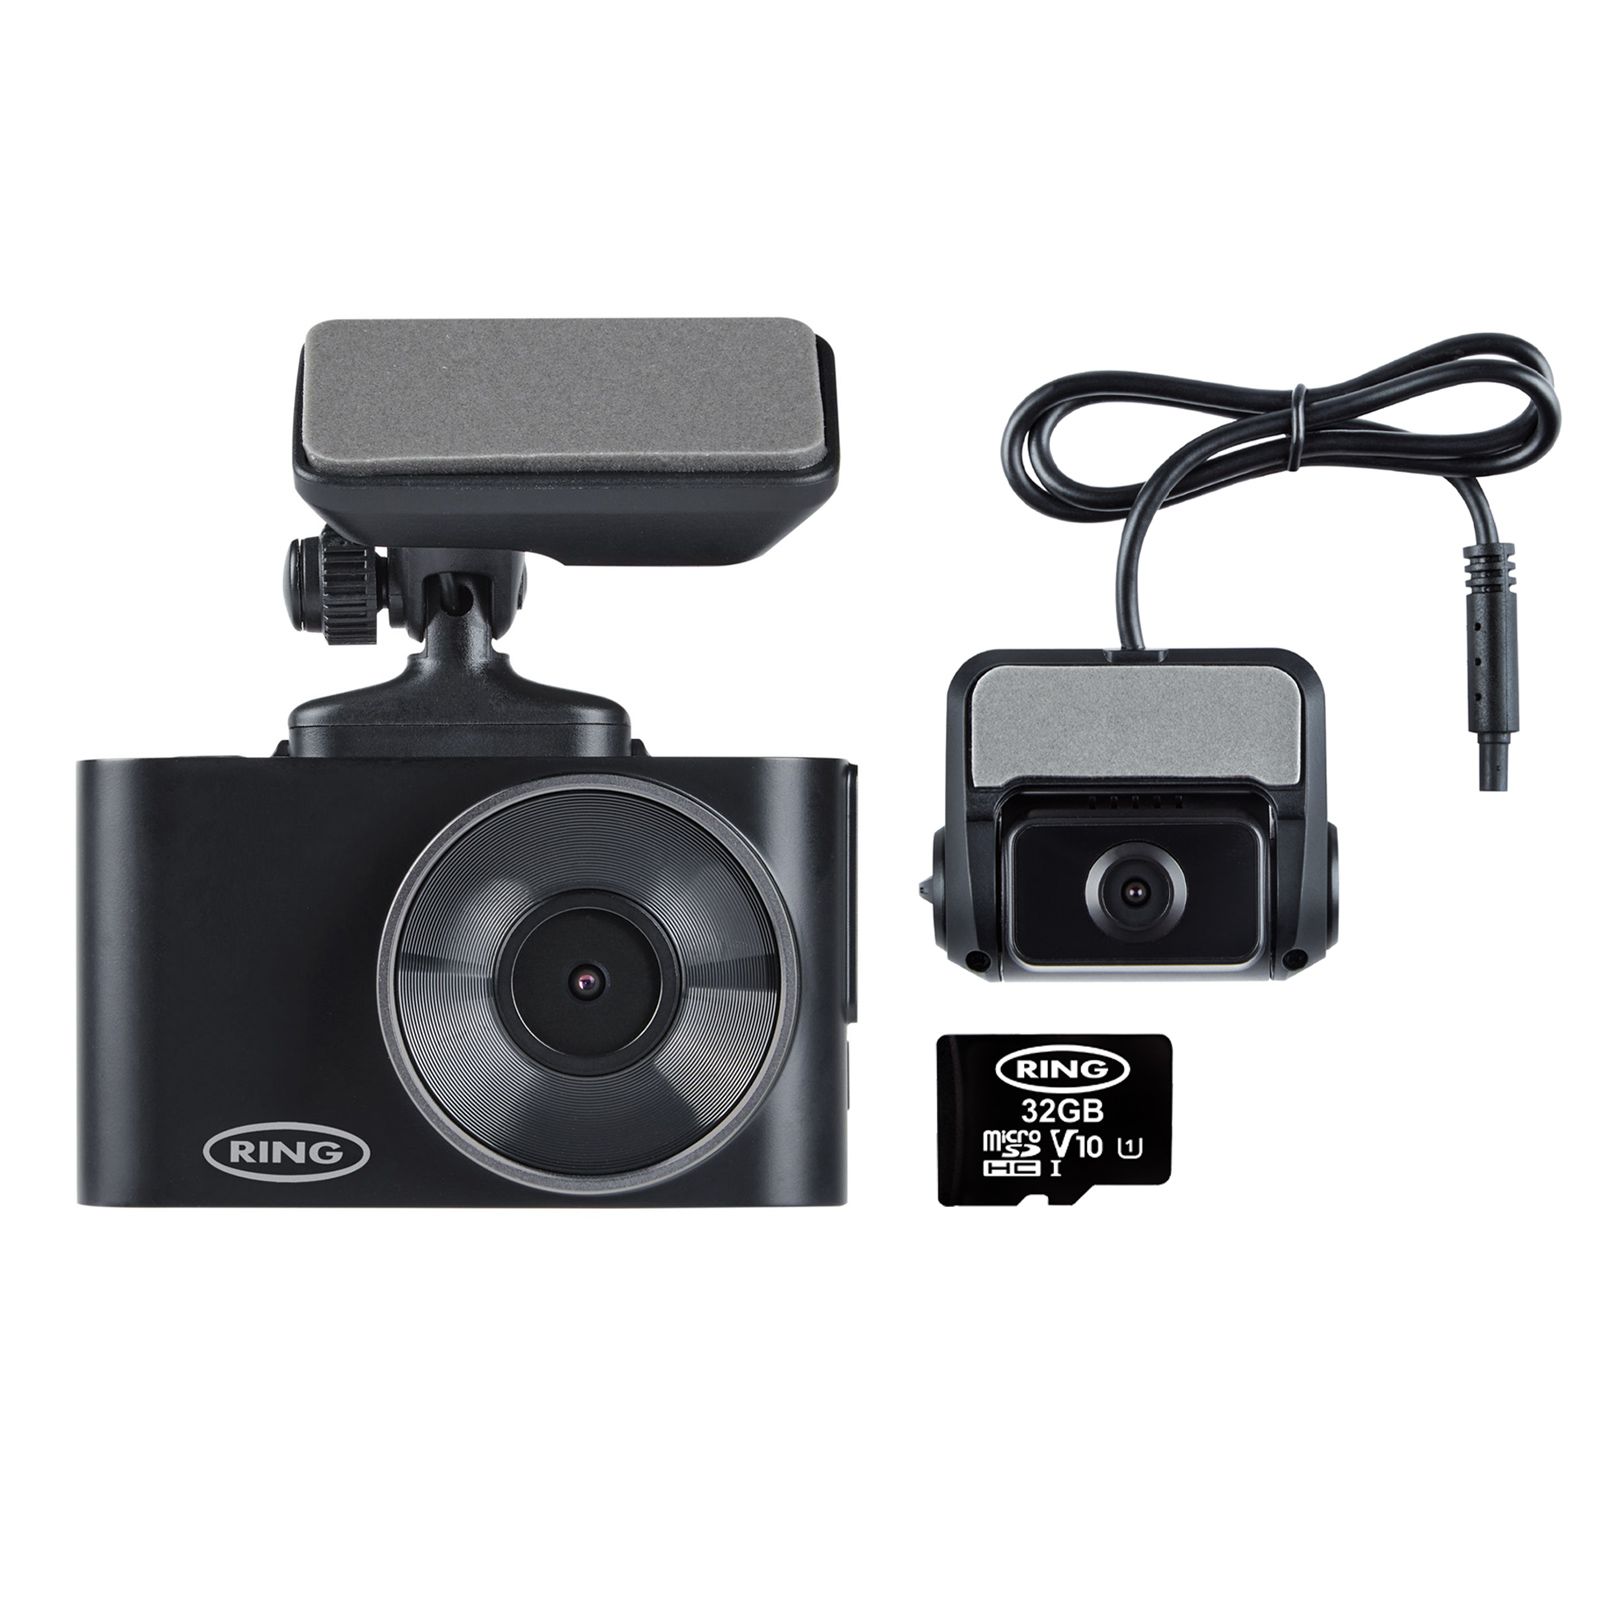 RSDC3000 Dashcam Bundle with Rear Camera and SD Card